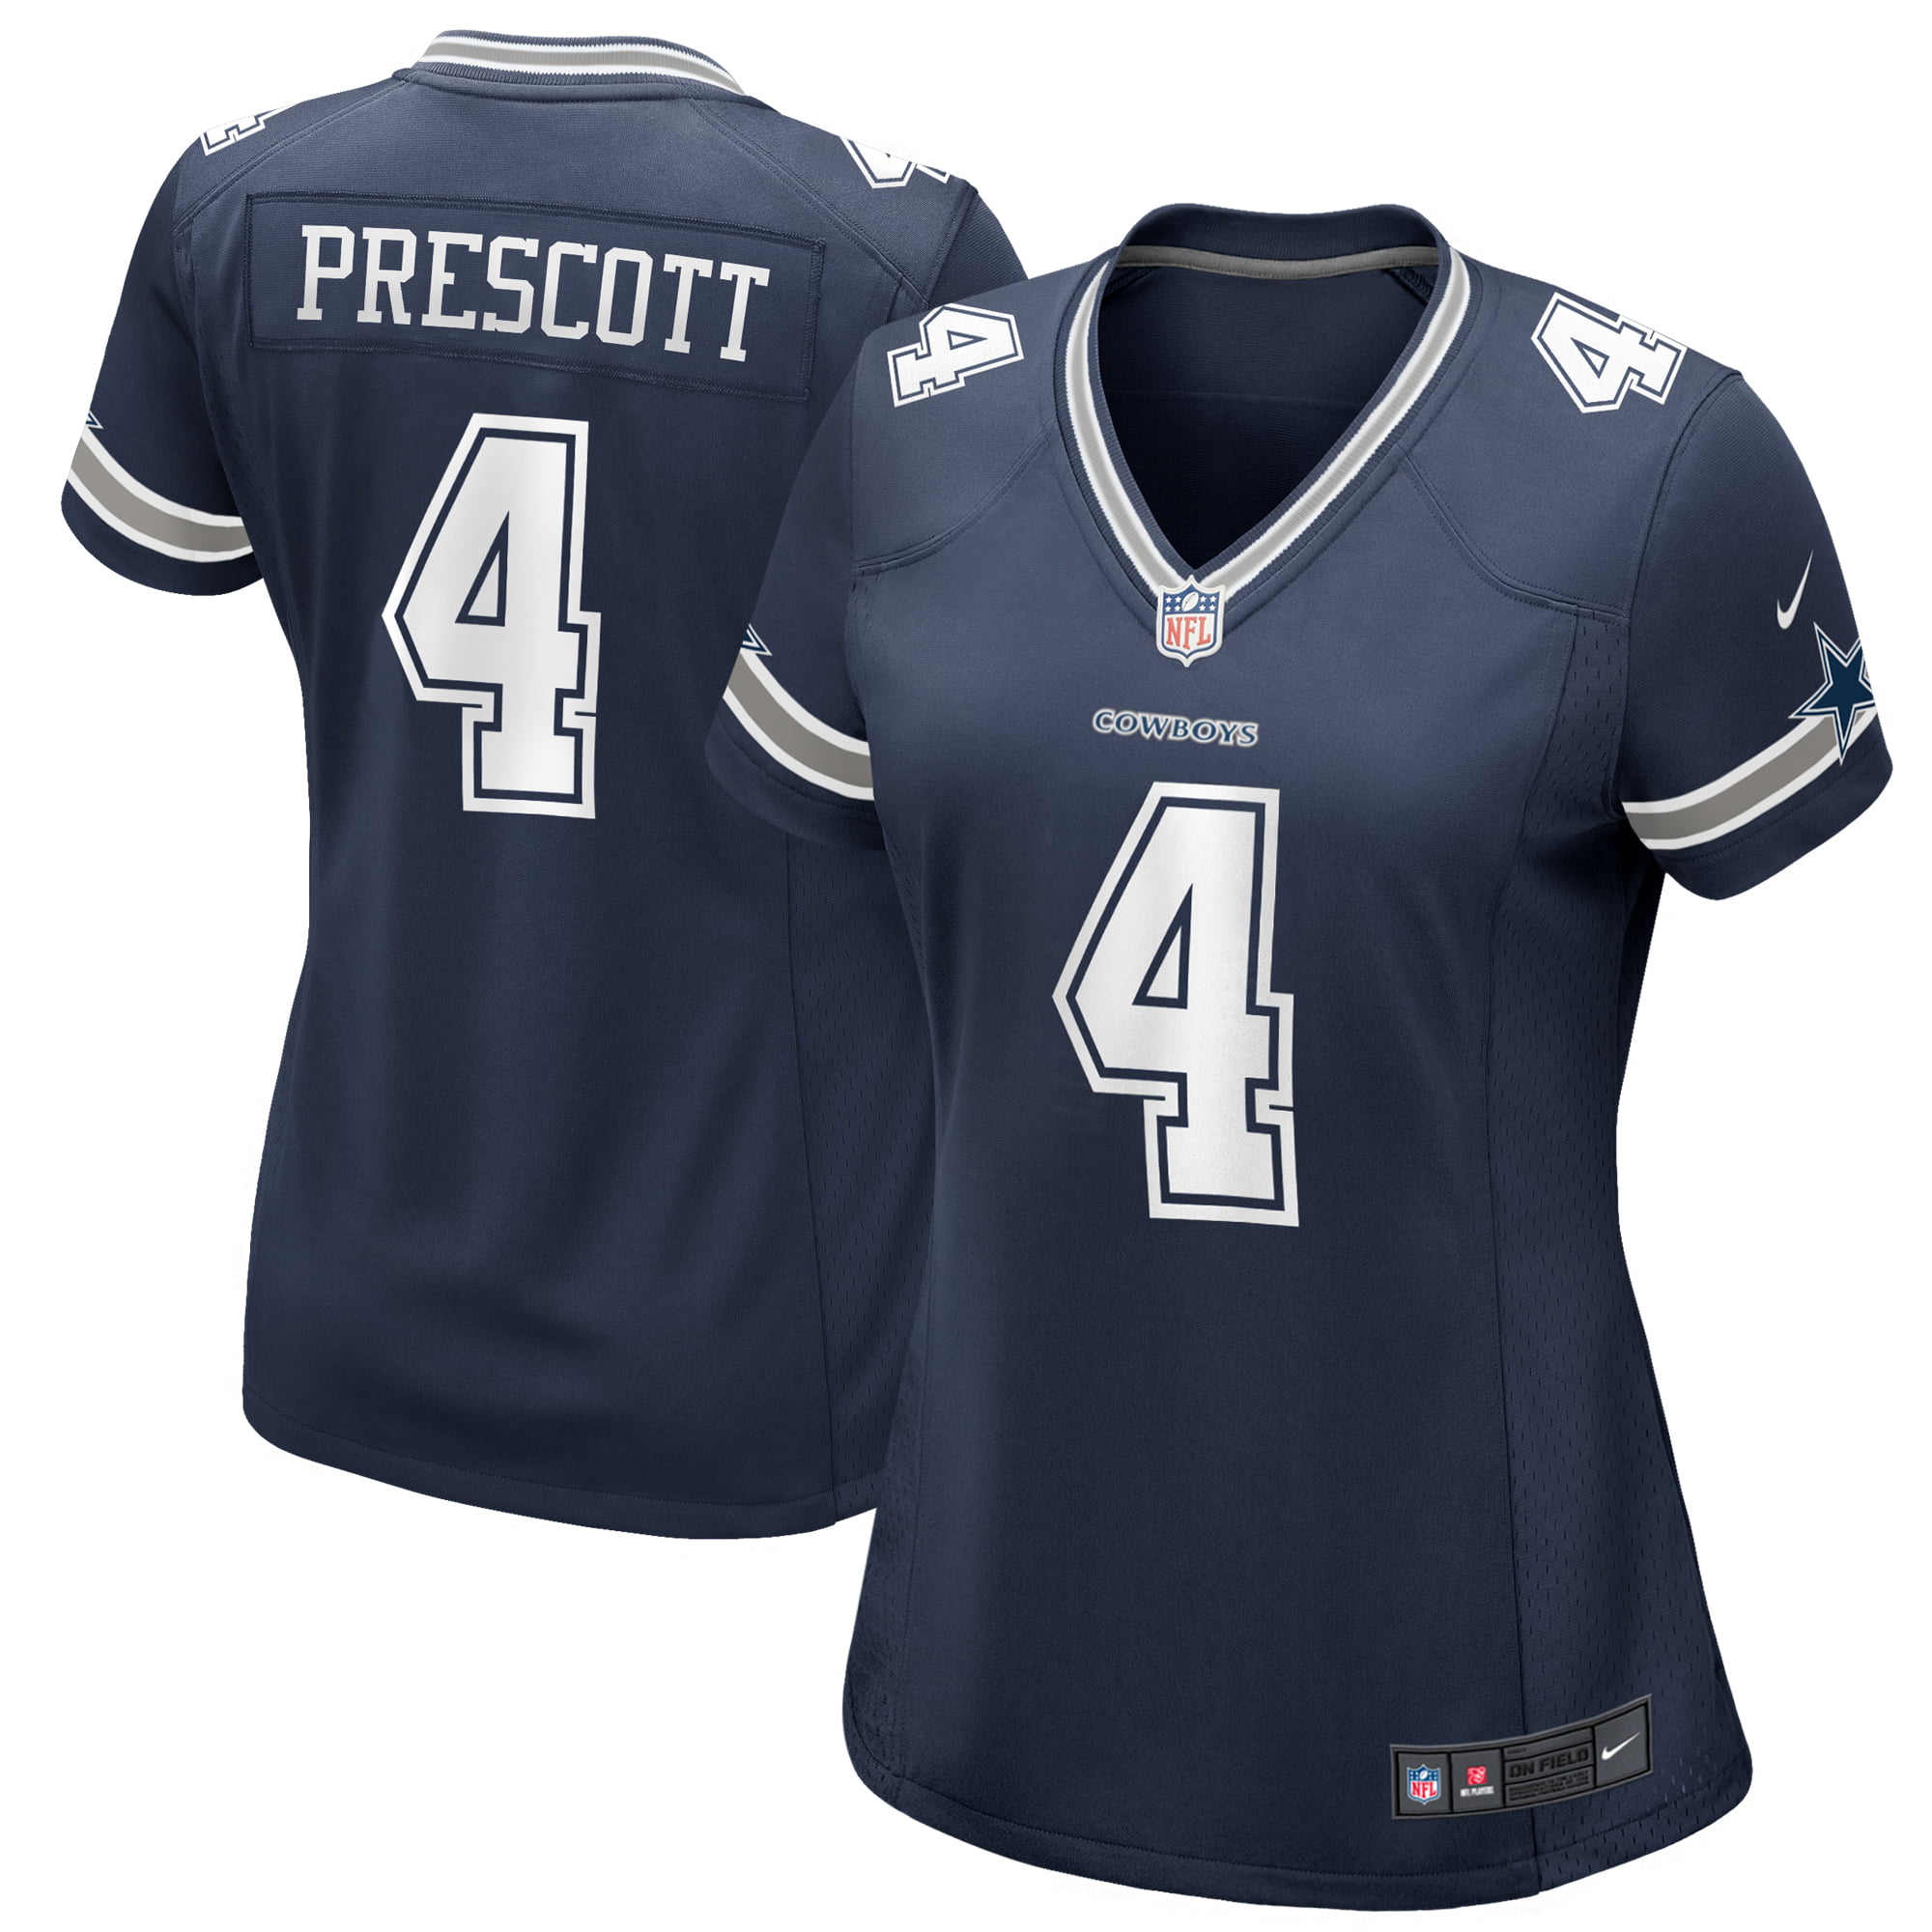 best cowboys jersey to get